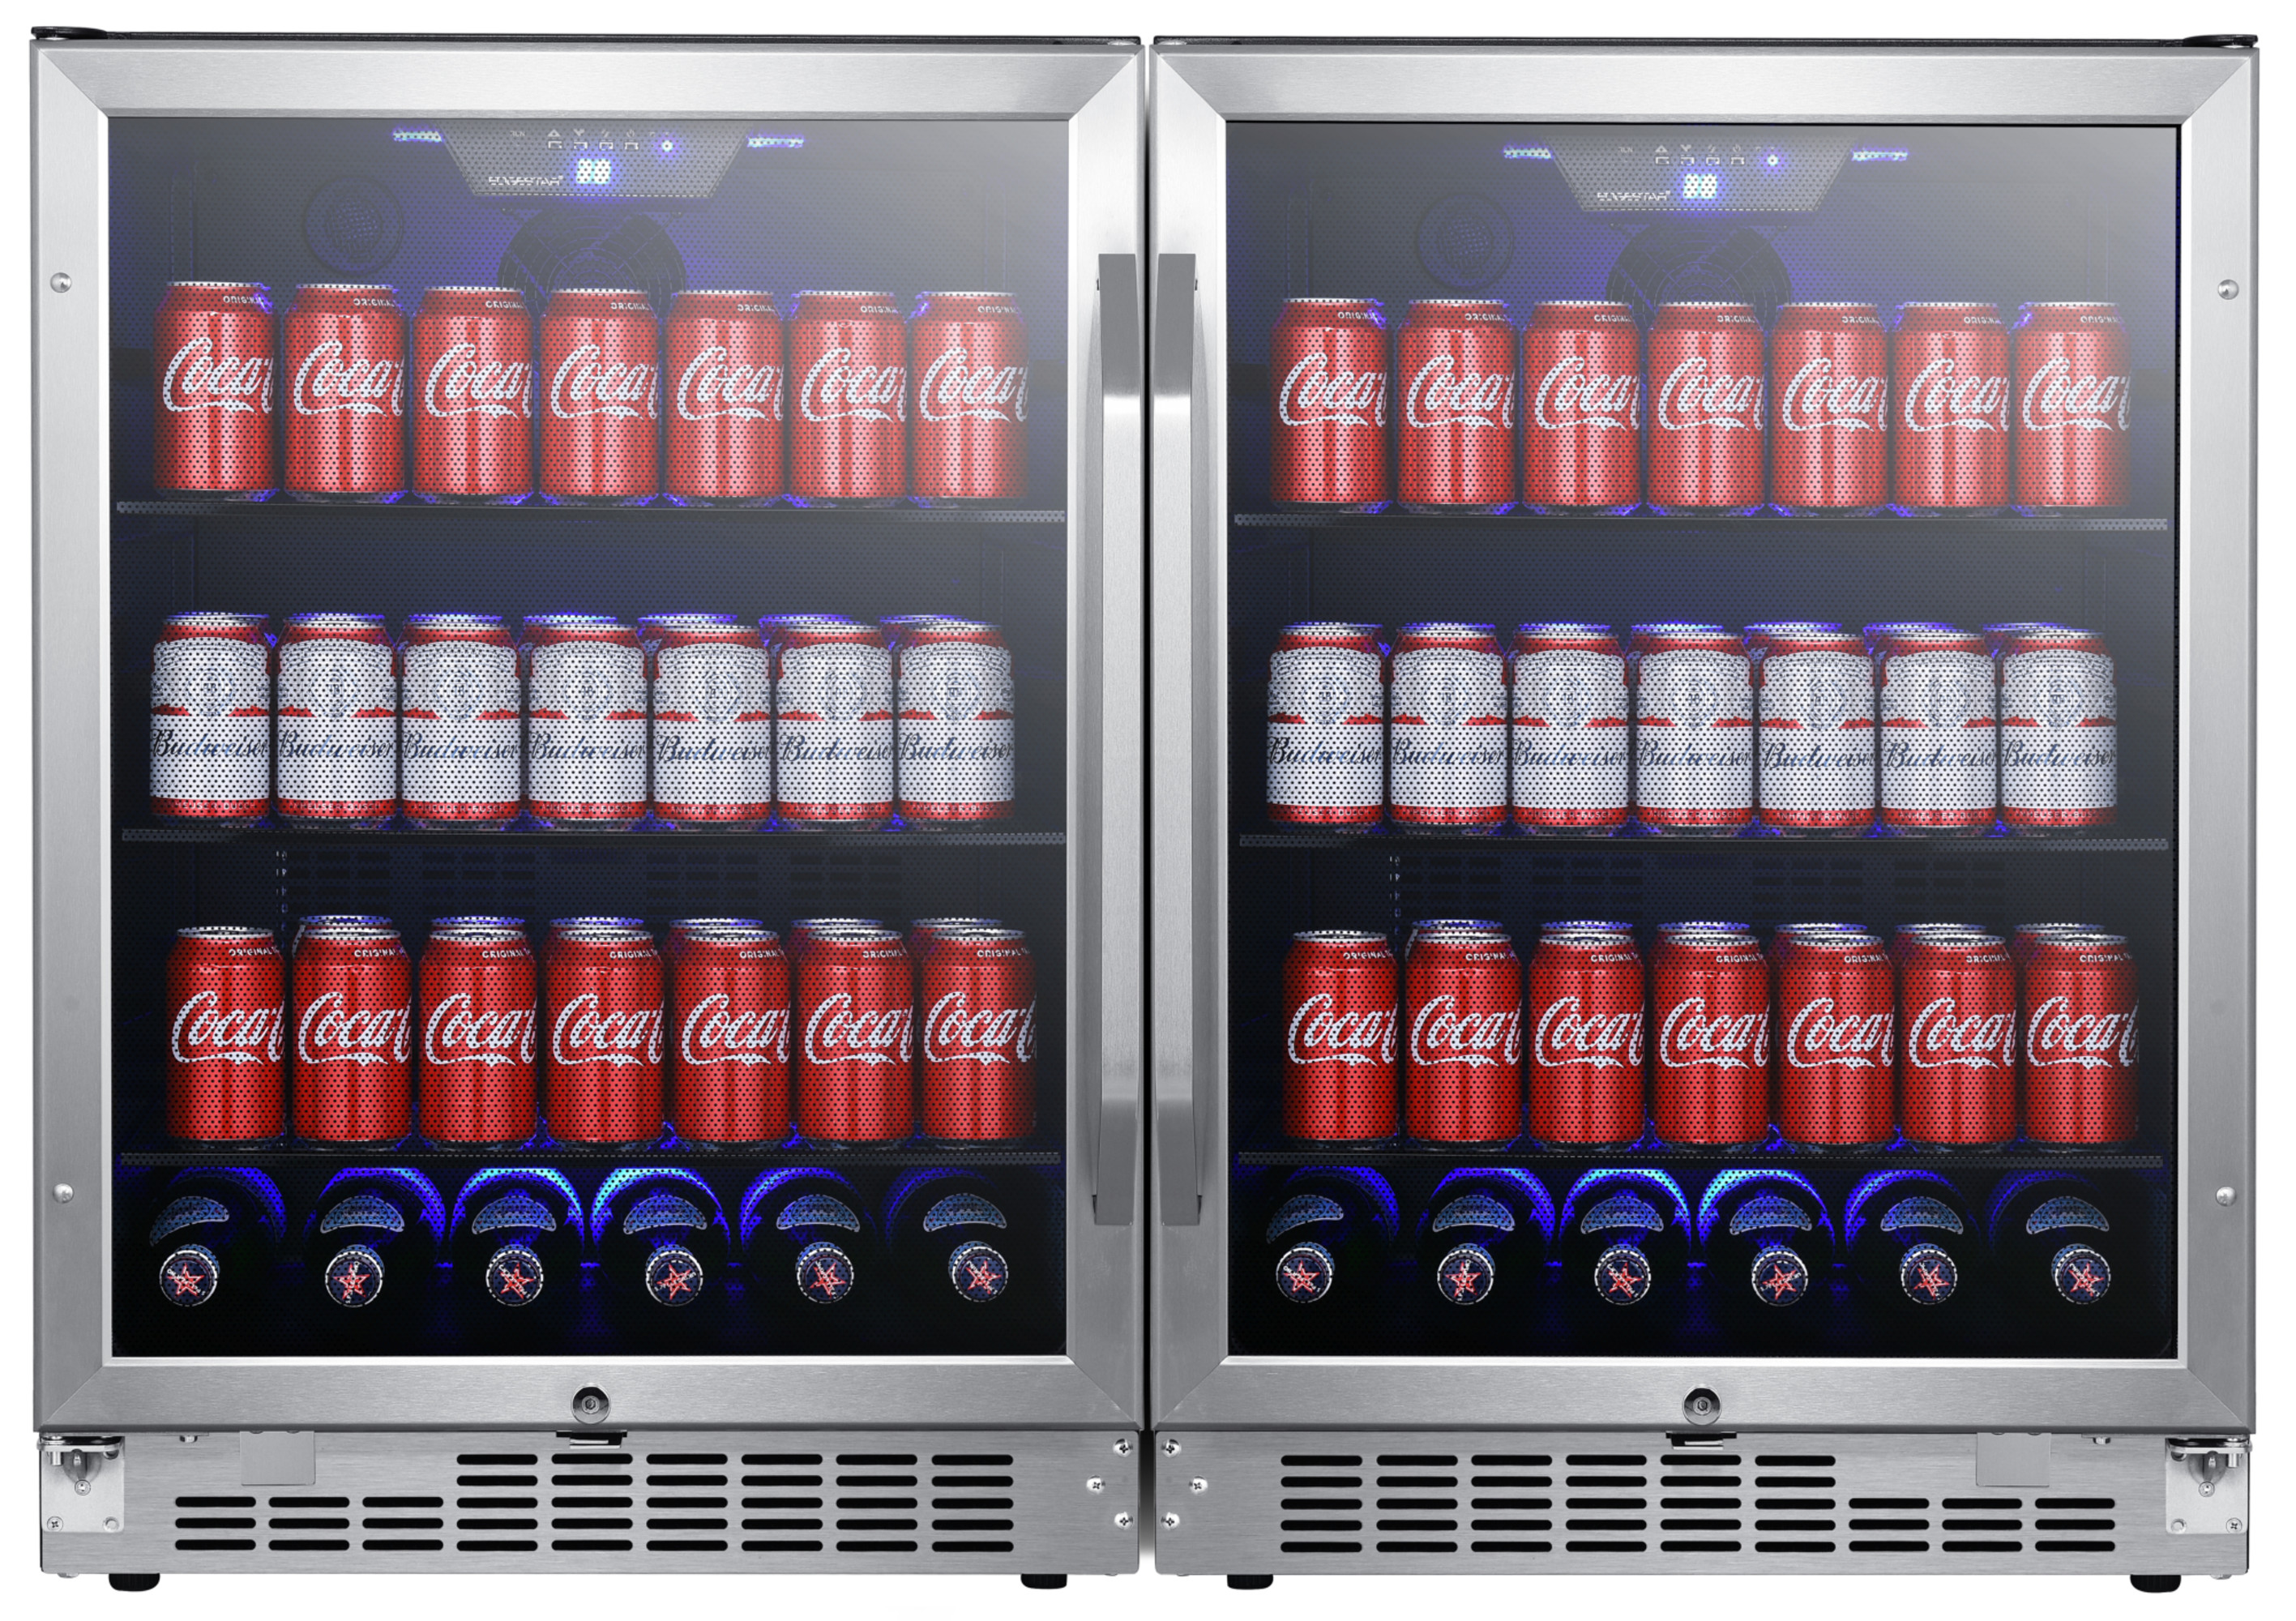 Edgestar Cbr1502sgdual 48" Wide 284 Can Built-In Side-By-Side Beverage Cooler - Stainless - image 1 of 2